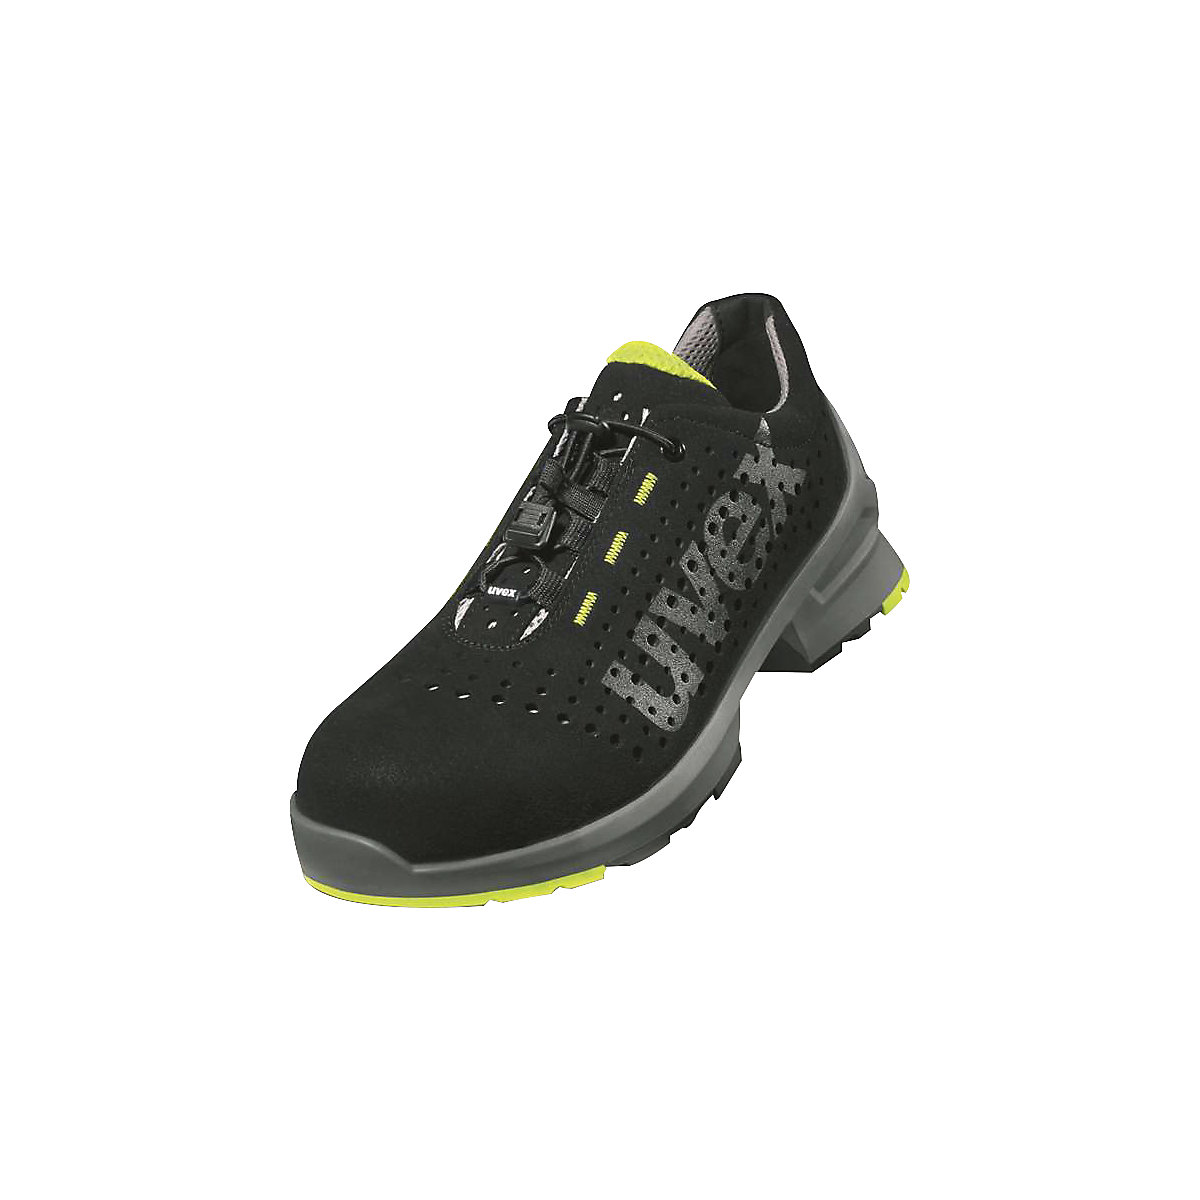 ESD S1 SRC safety lace-up shoe - Uvex